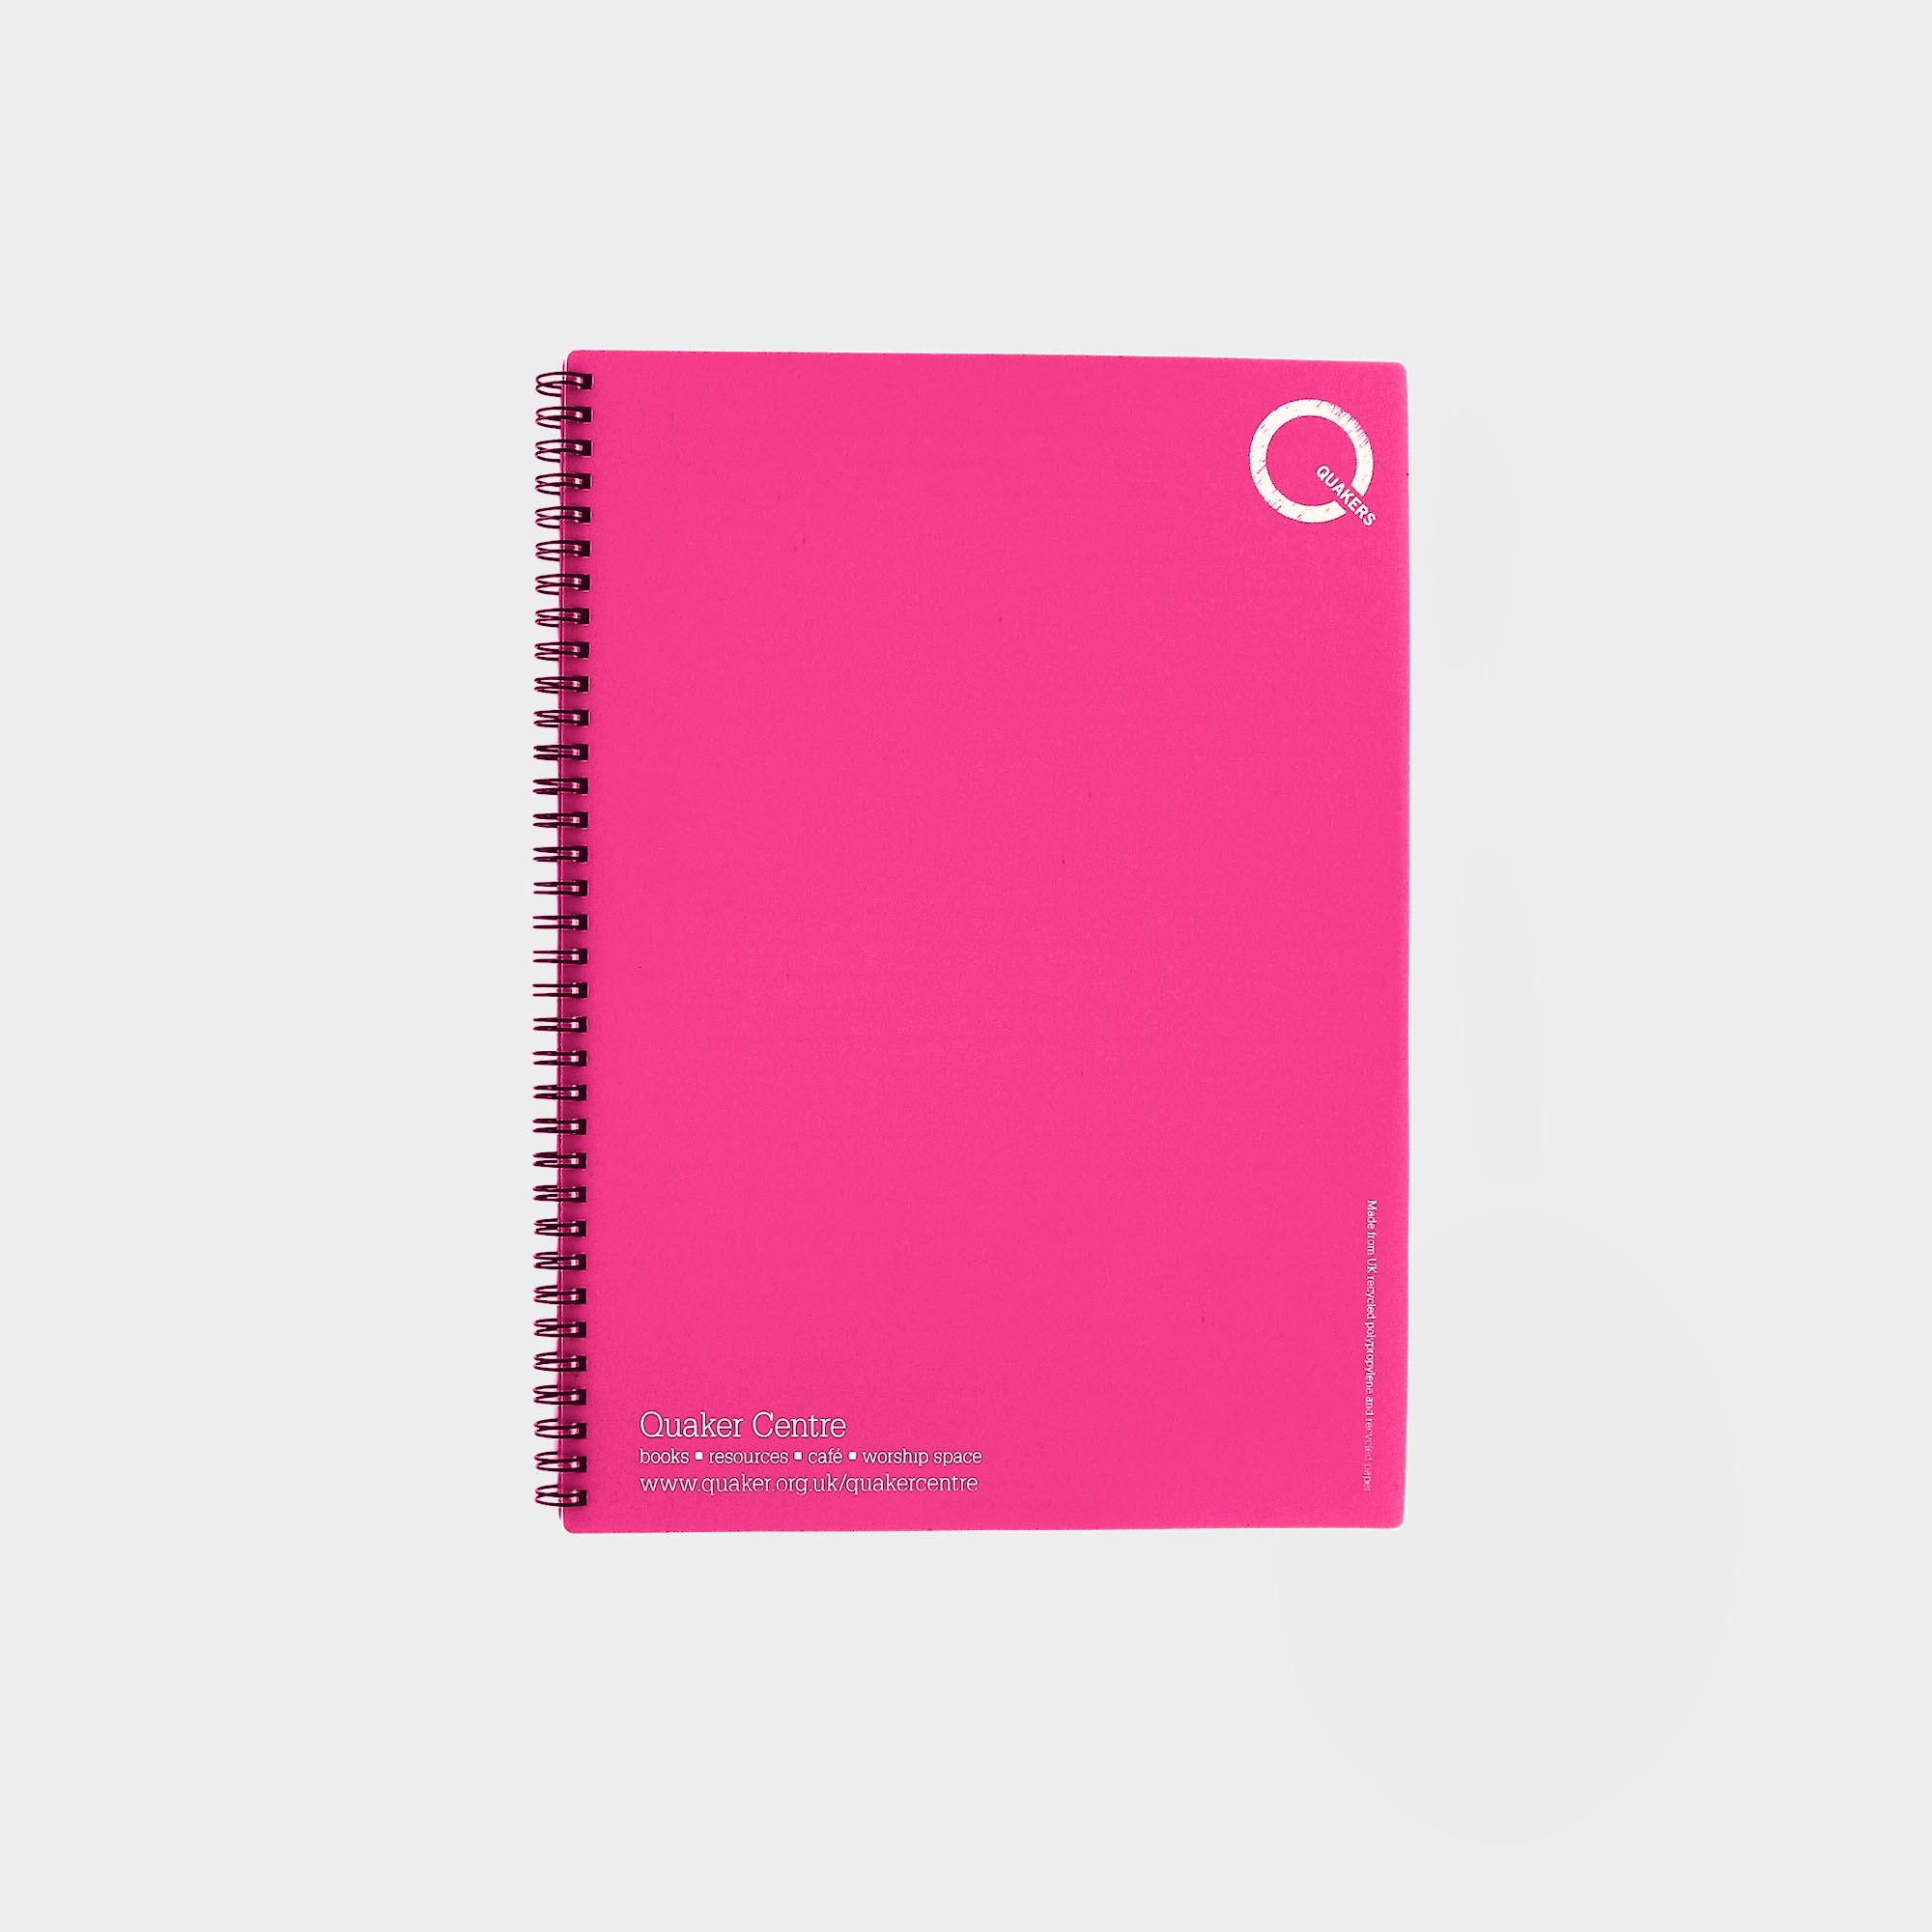 The Green & Good Polypropylene Notebook comes with recycled paper - size A4. The front and back cover is made from recycled polypropylene (500 microns), the sheets are 80gsm. Comes wirebound with 50 sheets as standard. Please contact us if you require a bespoke number of sheets. Pink